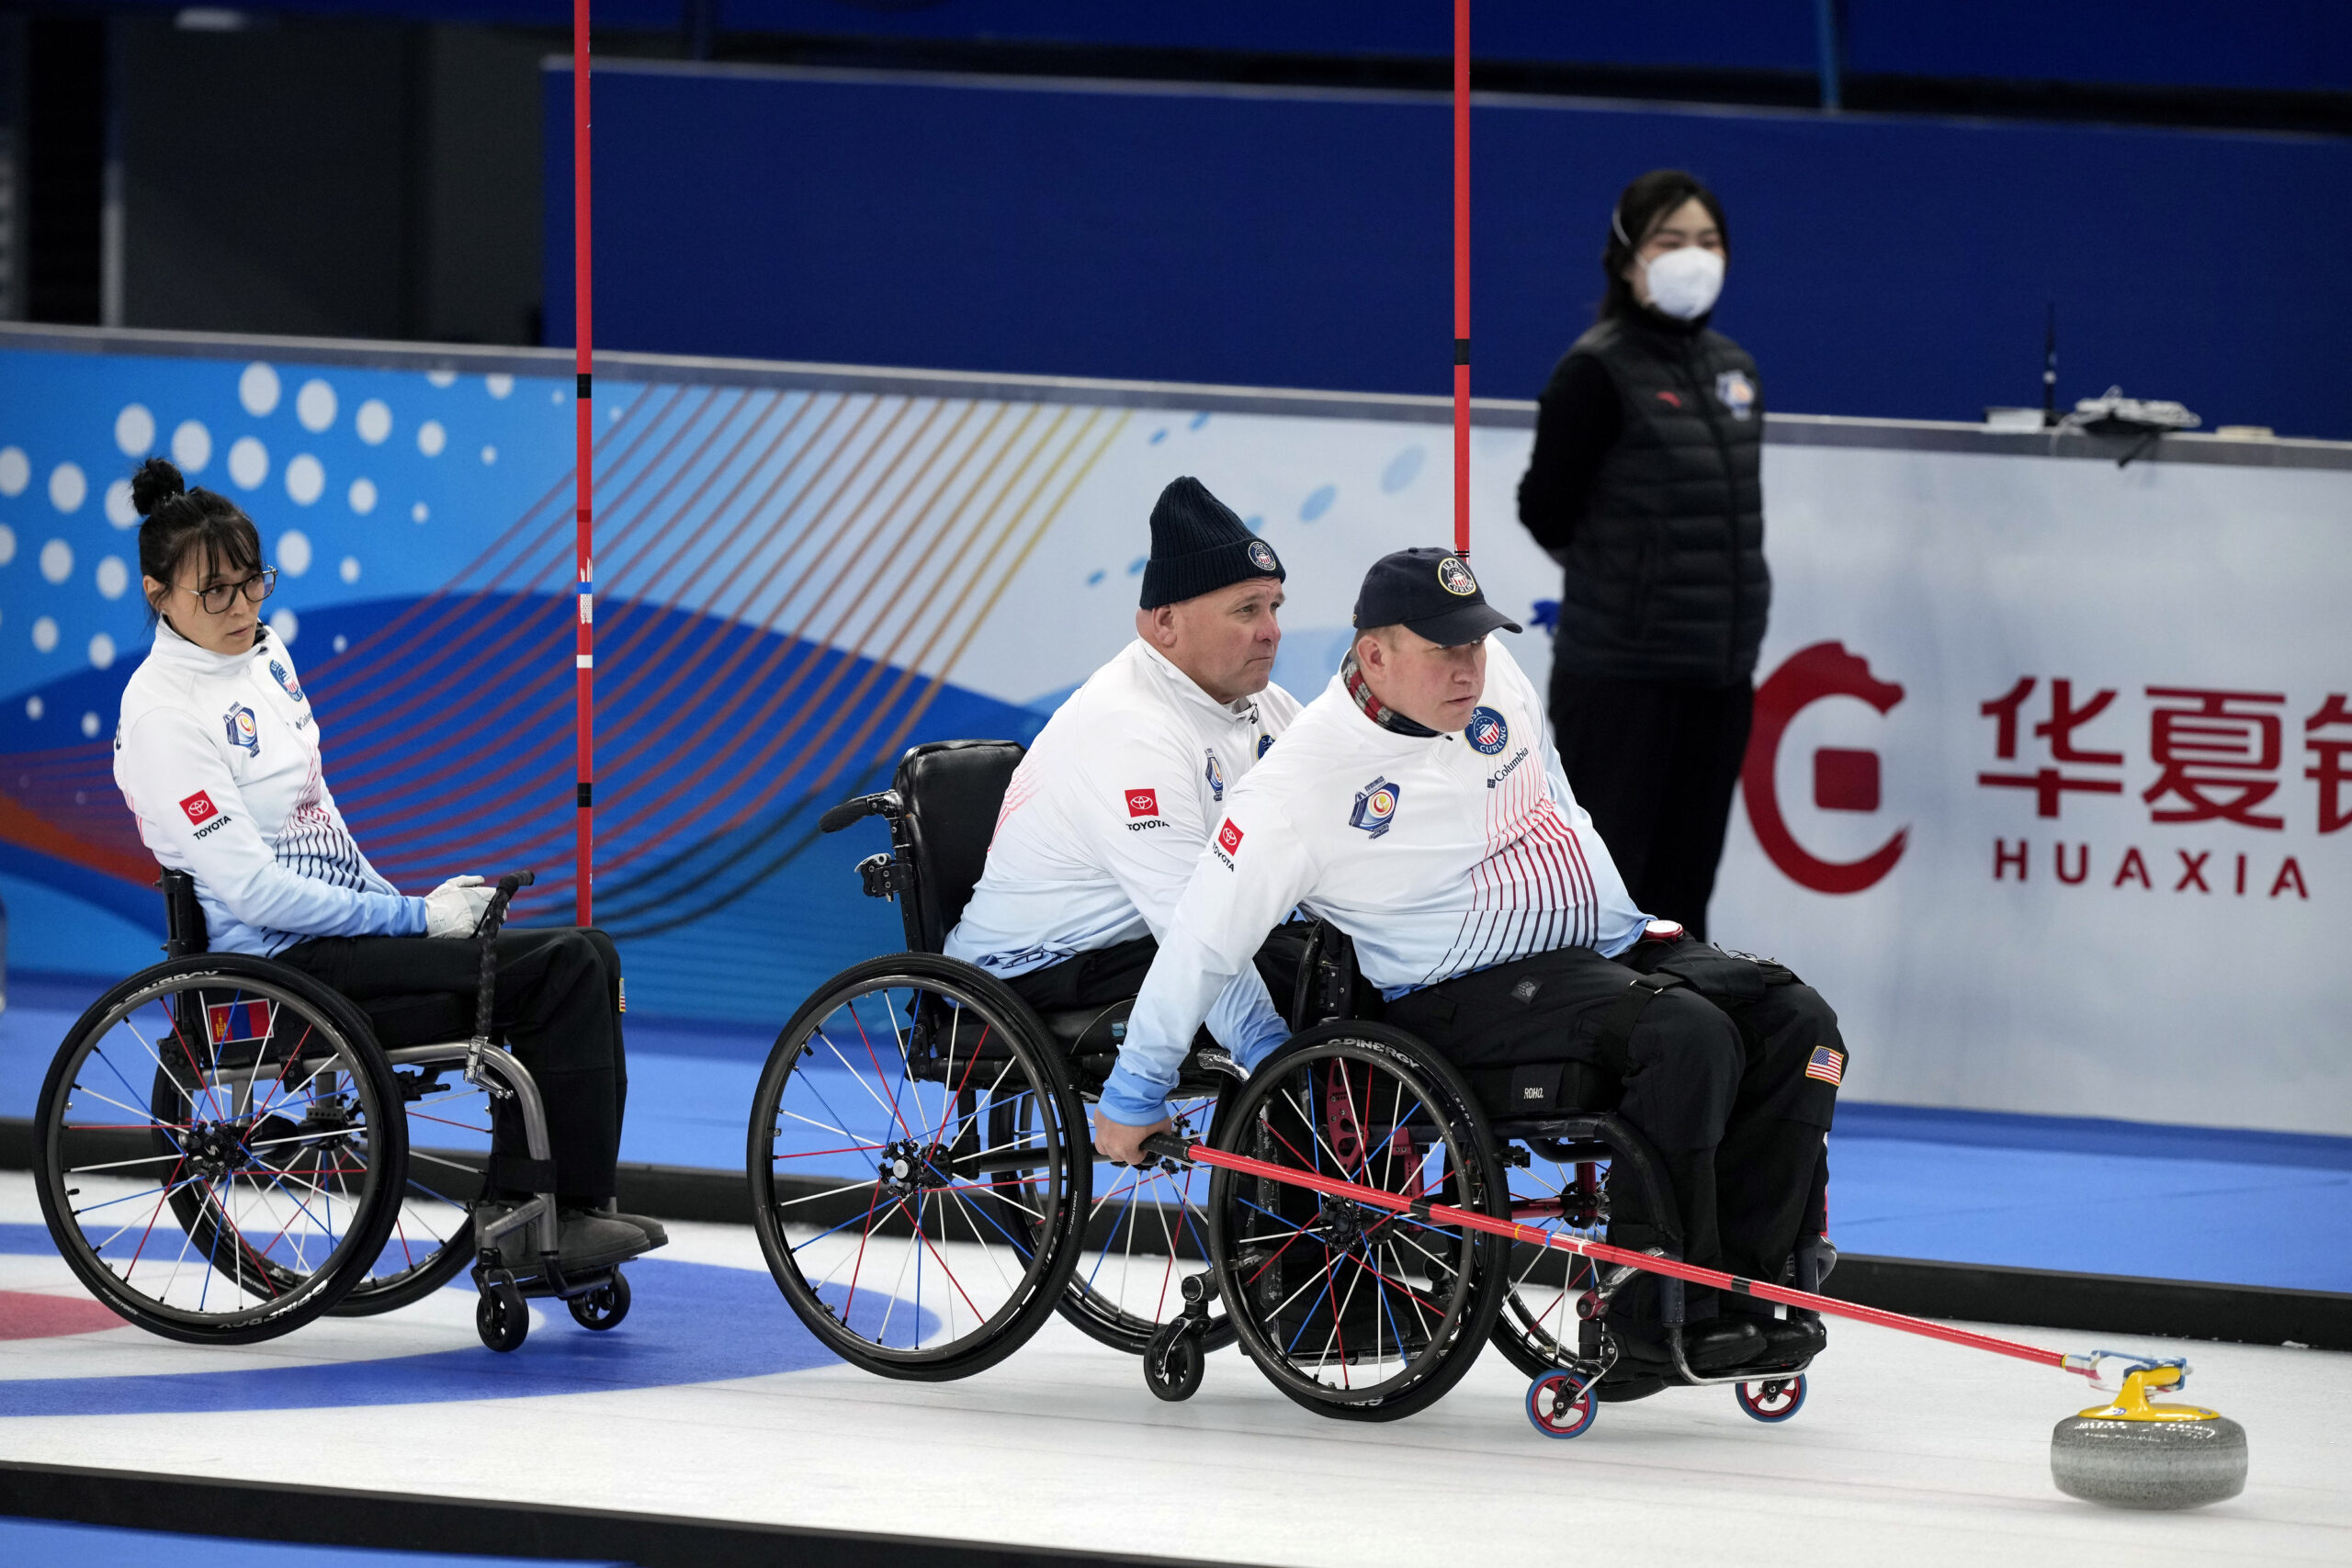 Batoyun Uranchimeg, David Samsa, and Matthew Thums of the United States compete during their semifinal match against Canada at the World Wheelchair Curling Championship